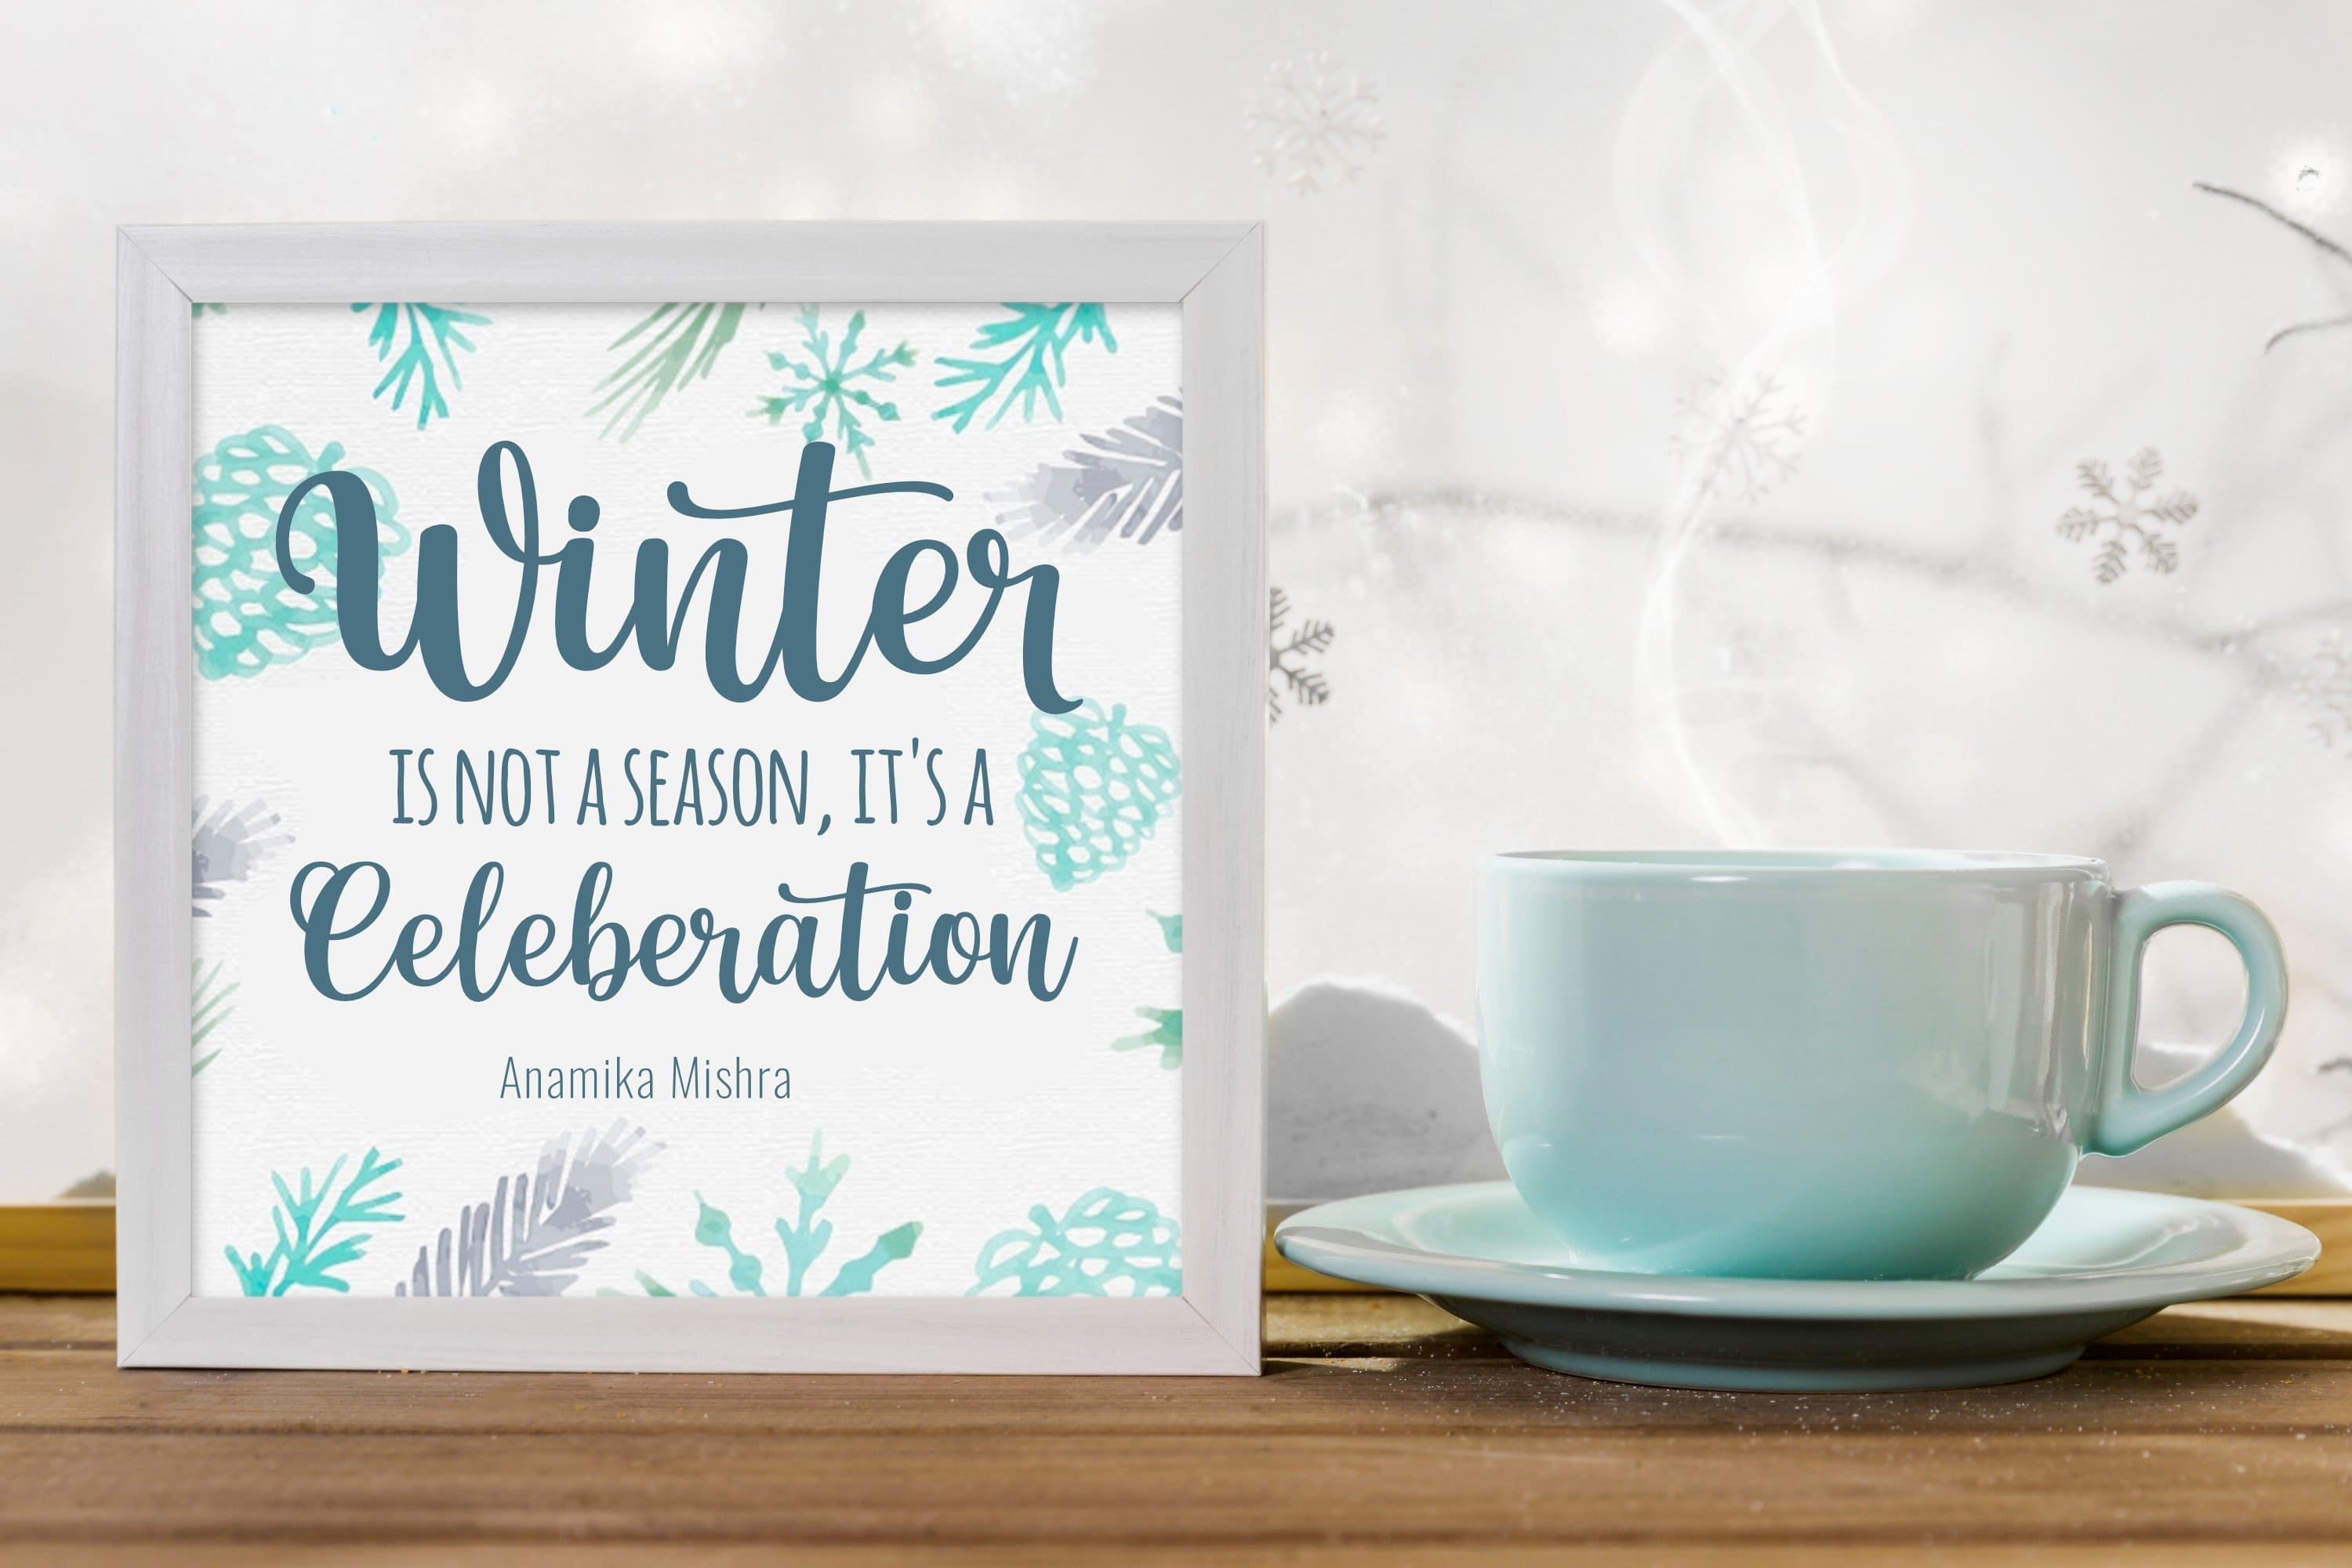 A picture with painted snowflakes and the inscription "Winter is not a season, it's a celebration".